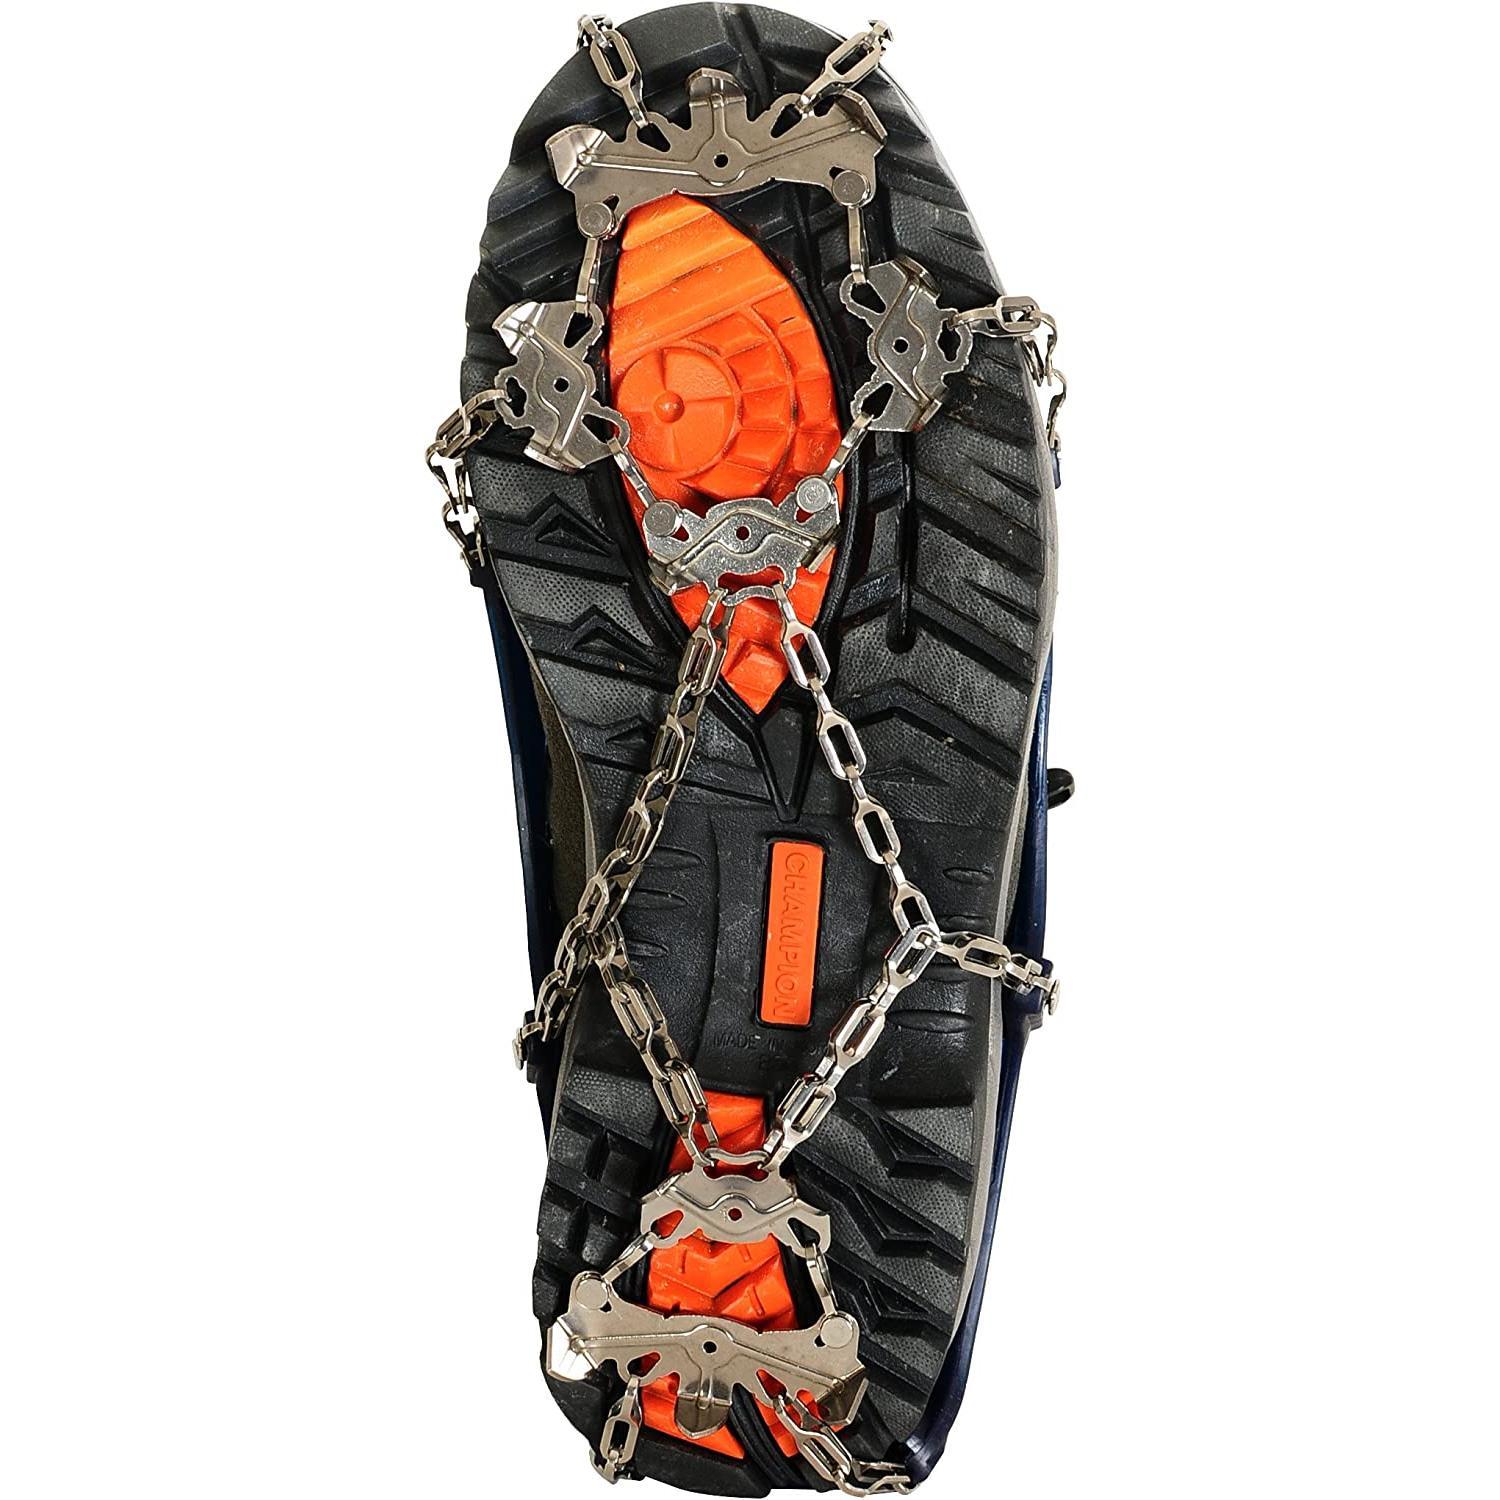 Yatta Life Trail Spikes Crampons for Trail Running, Hiking, Ice Fishing and Climbing